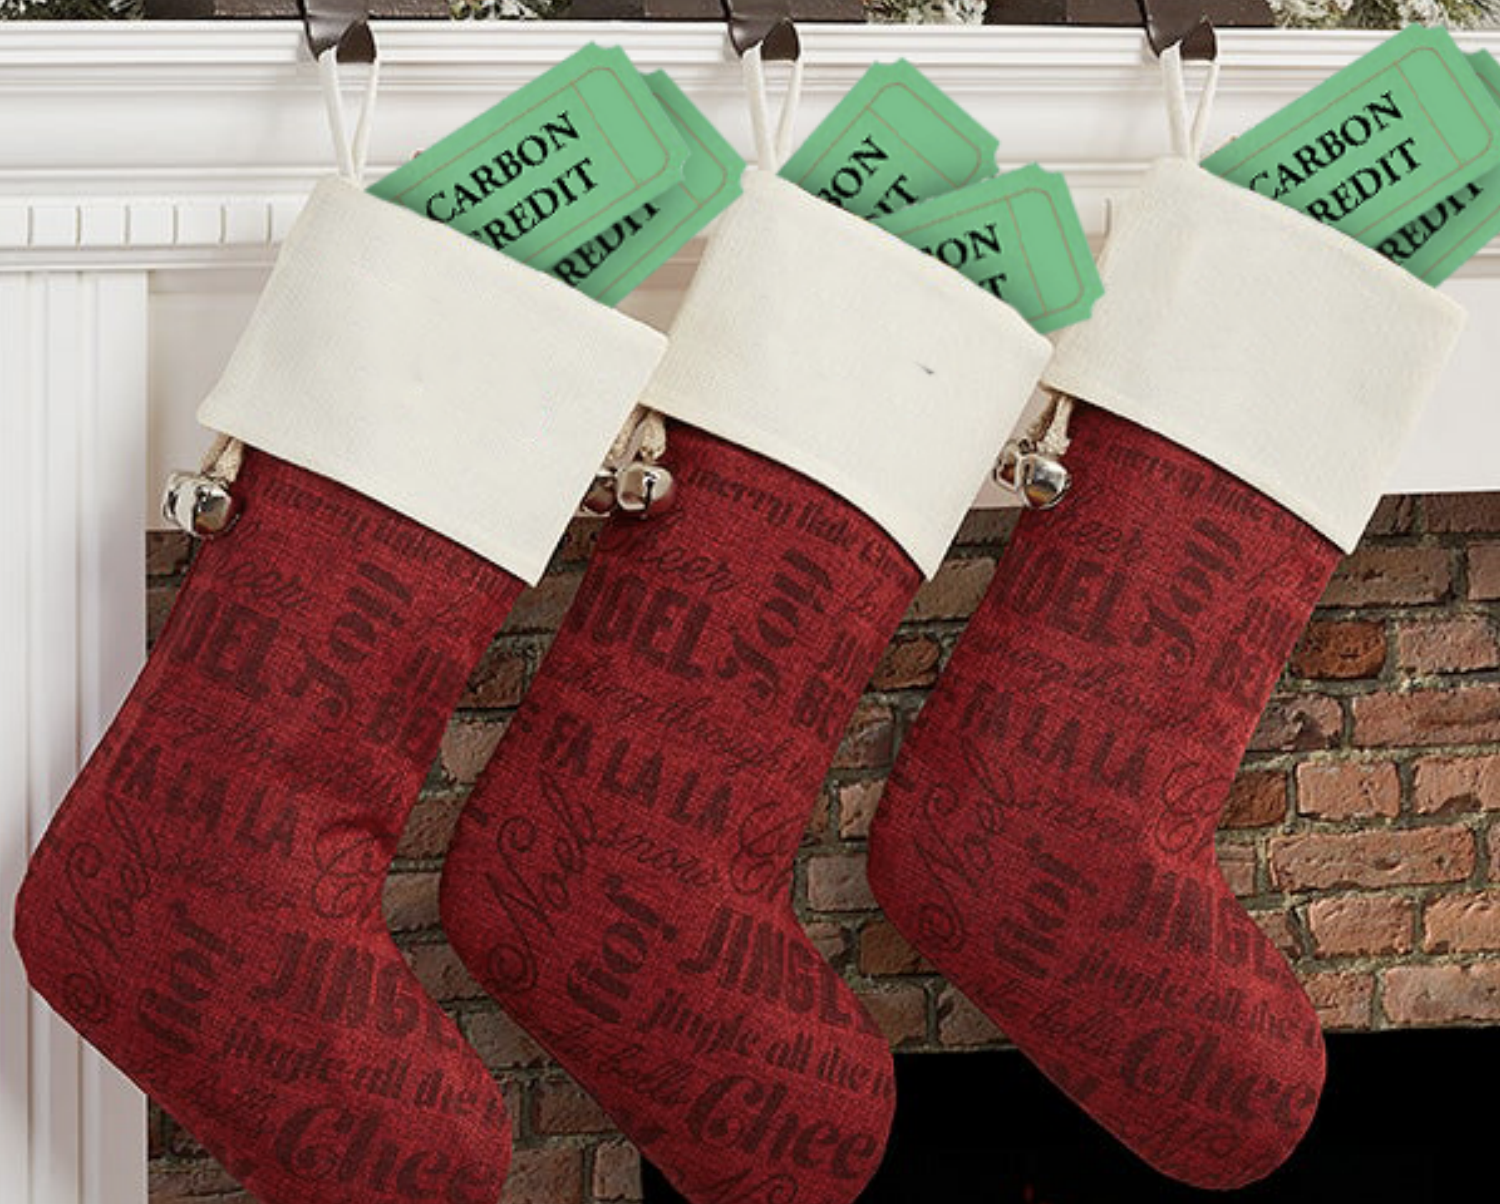 Santa To Put Carbon Credits Instead Of Coal In Naughty Kids’ Stockings This Year